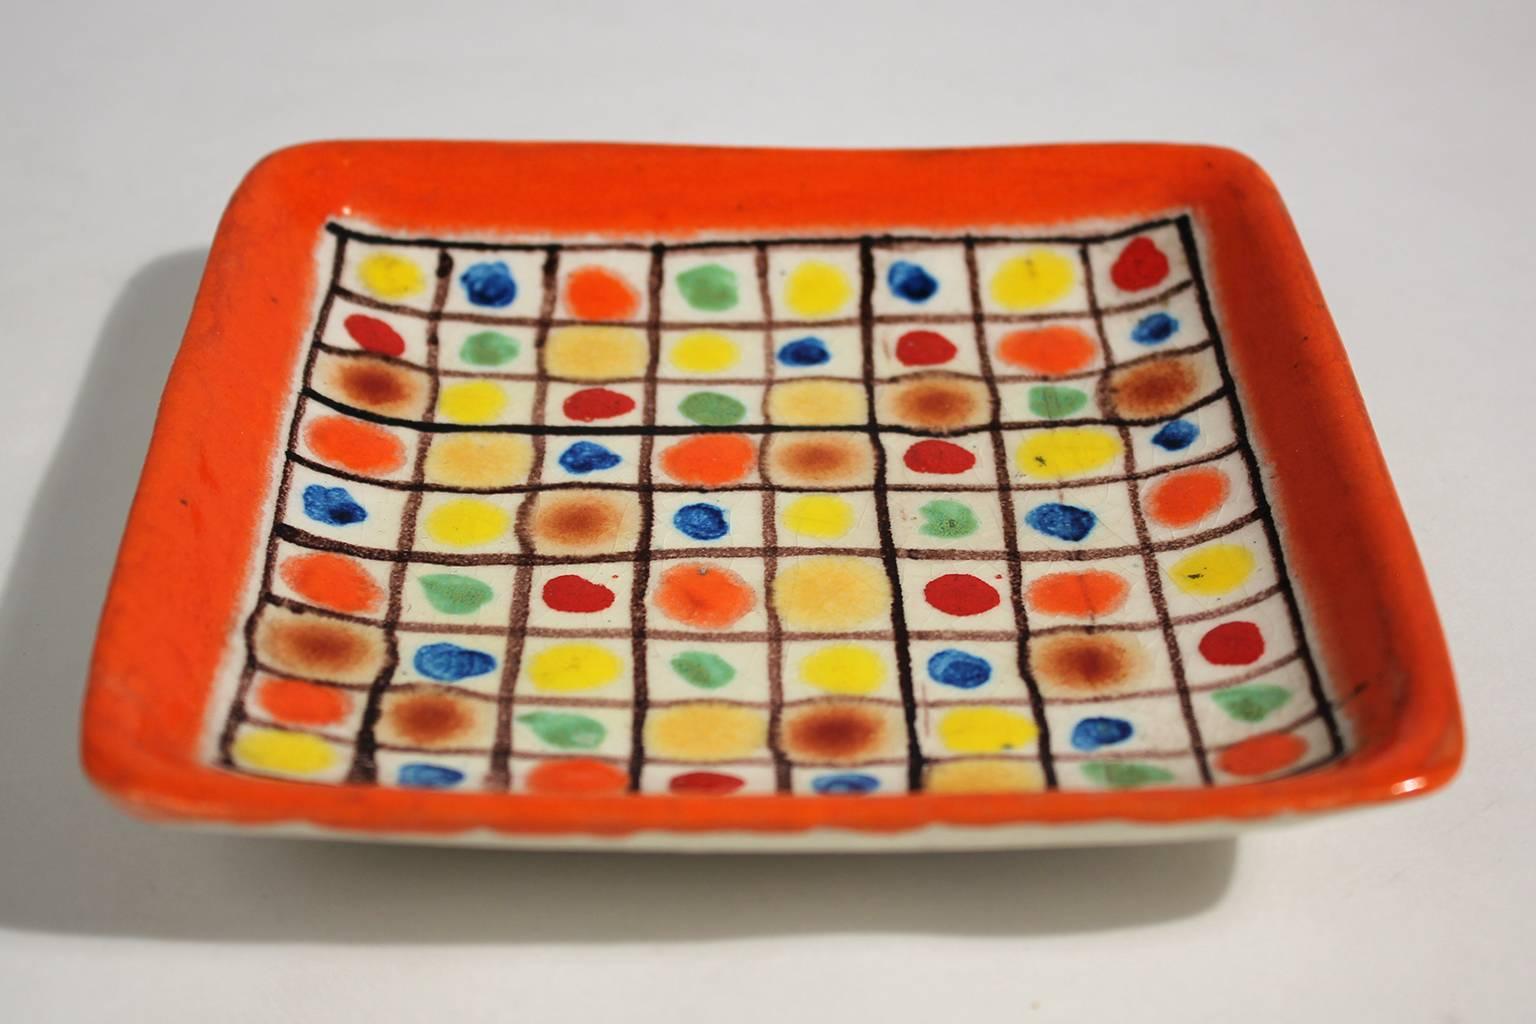 Stunning modernist Italian ceramic polychrome tray or plate by Guido Gambone. Rarely seen color dot design. In excellent shape and is signed on back.